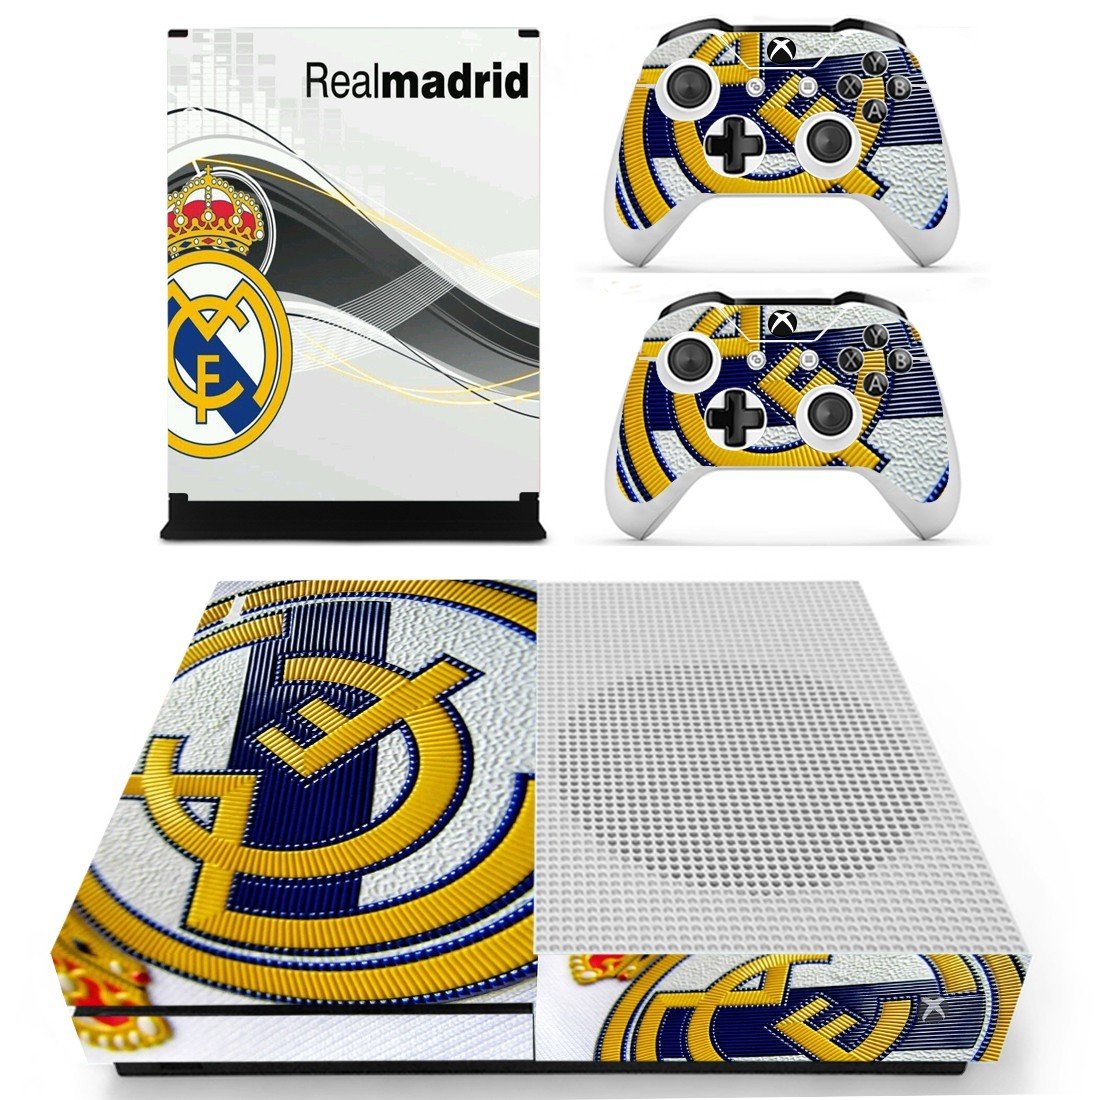 Real Mardrid Cover For Xbox One S